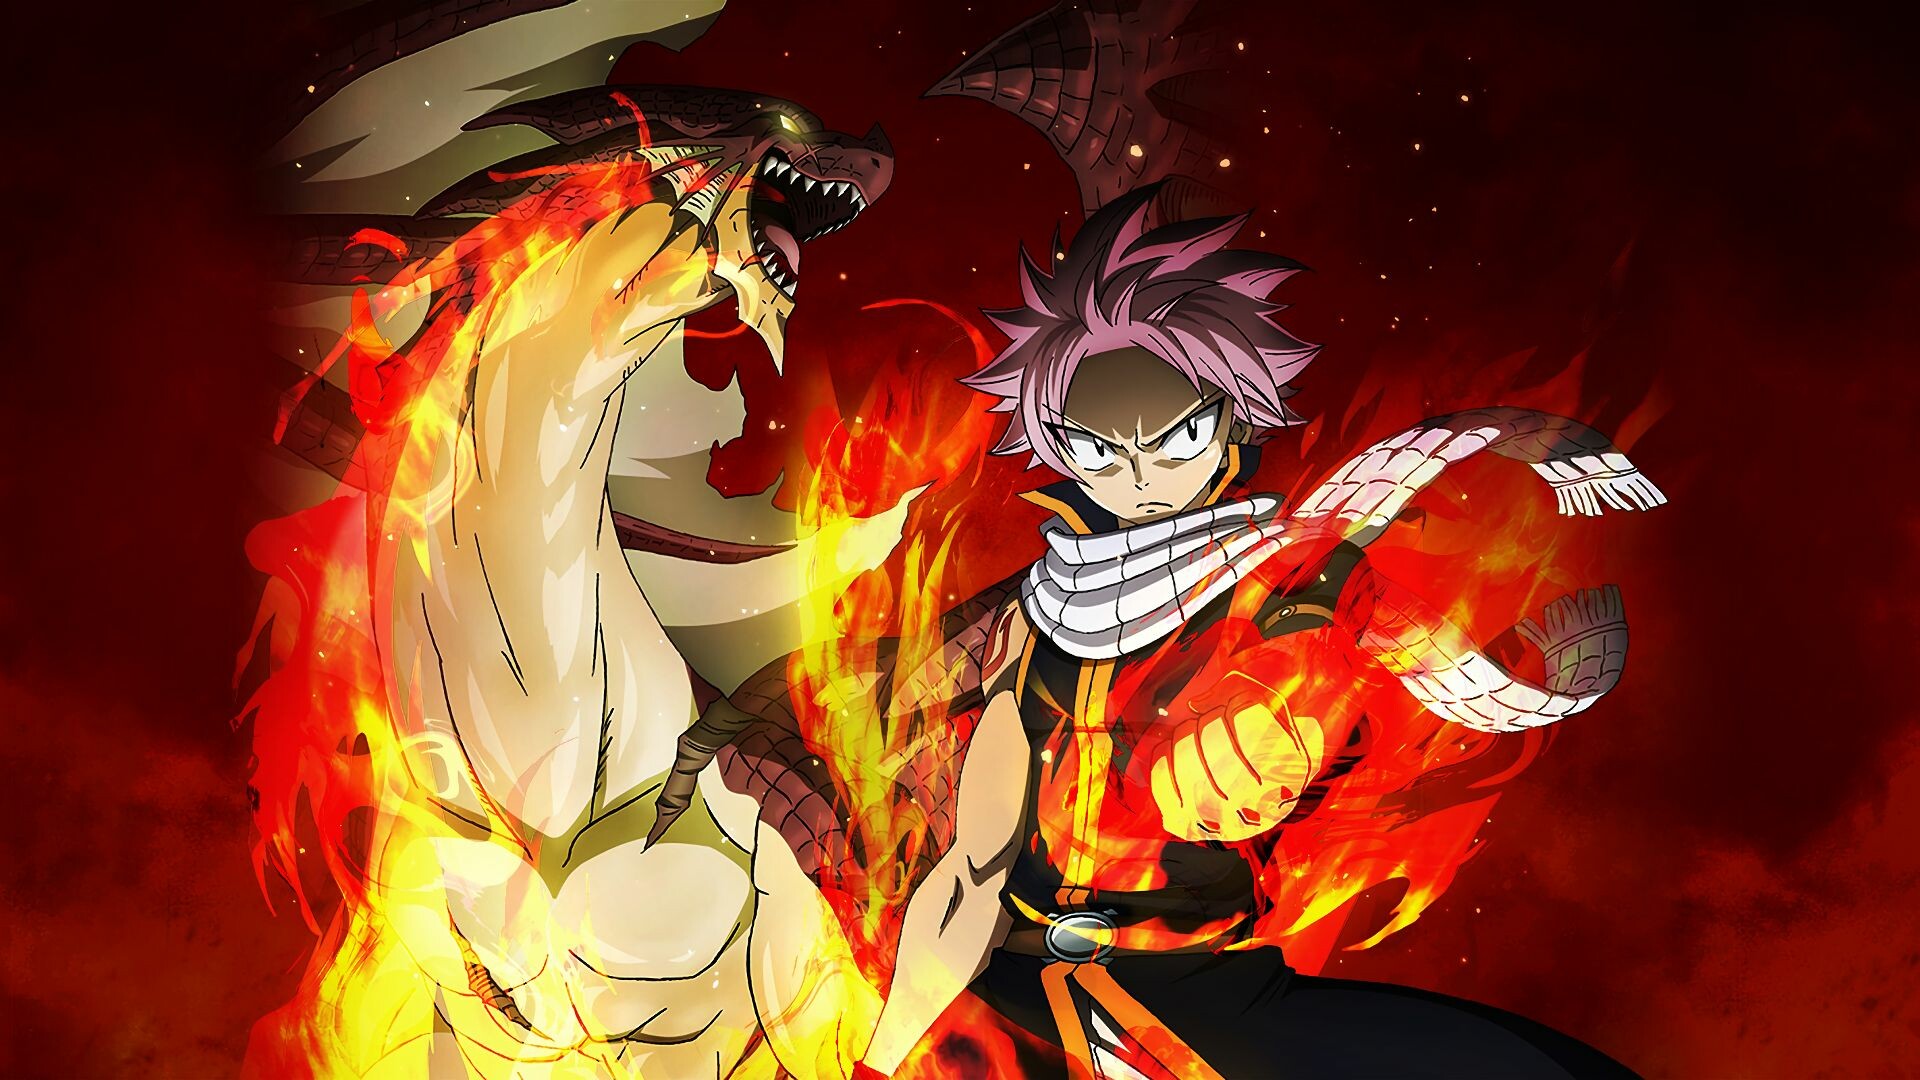 Fairy Tail: Natsu Dragneel, a male wizard who's also known as "Salamander". 1920x1080 Full HD Background.